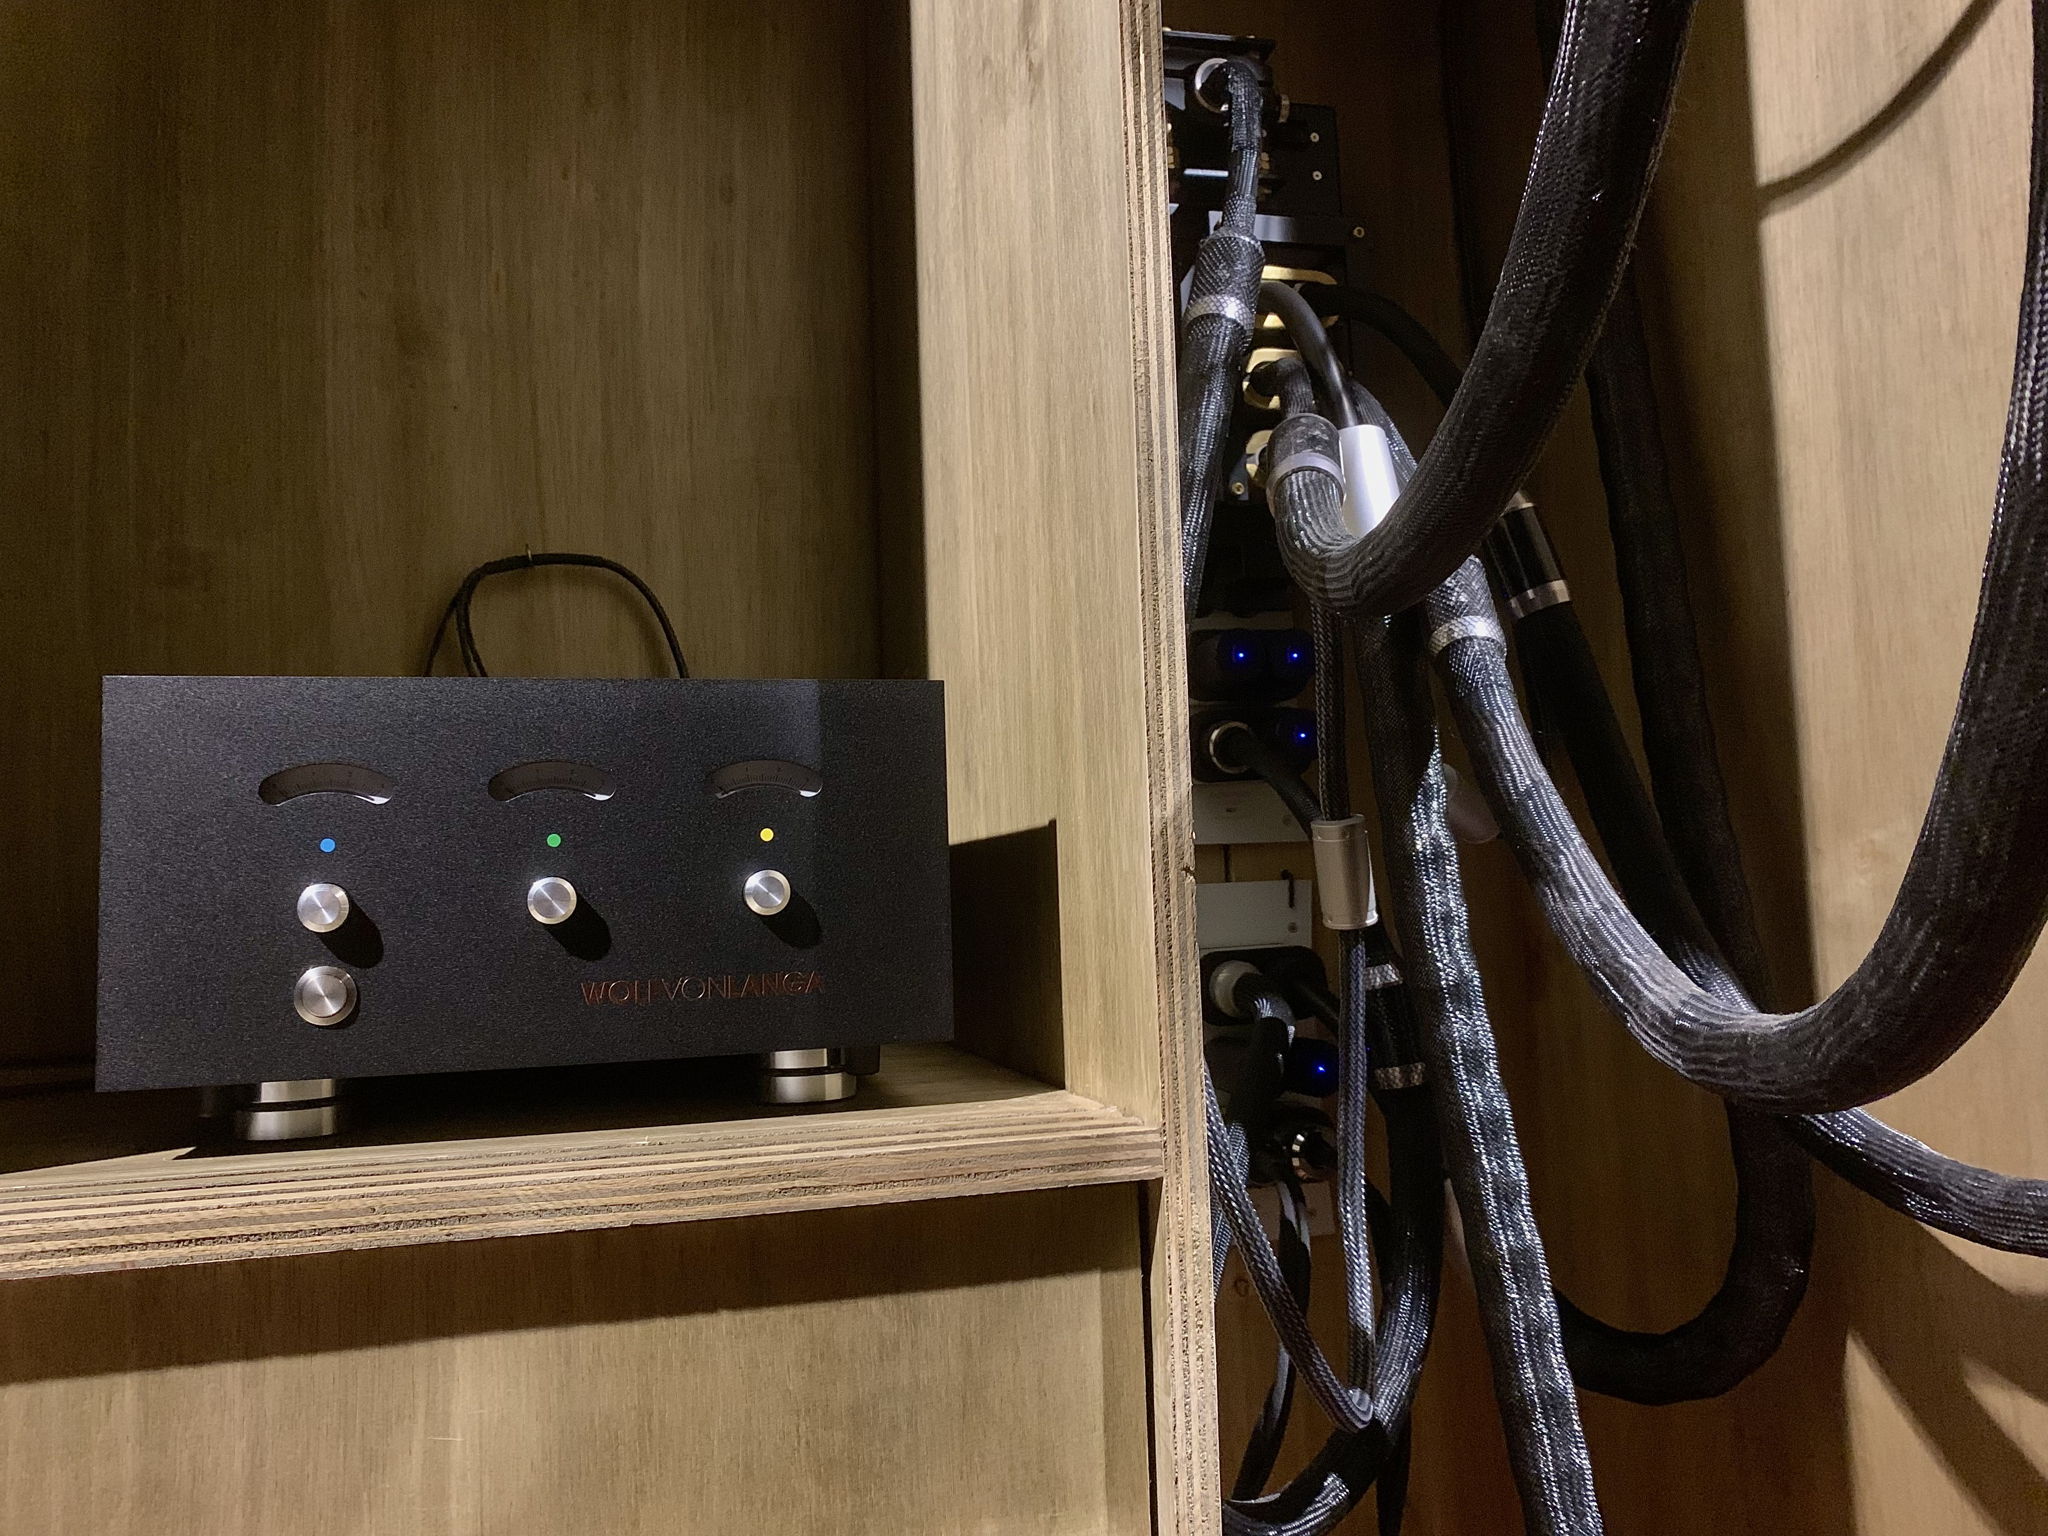 The field coil power supply, sitting atop four basic douk audio spring loaded isolation feet - a single spring to each foot for the greatest degree of float for the given weight of the power supply.